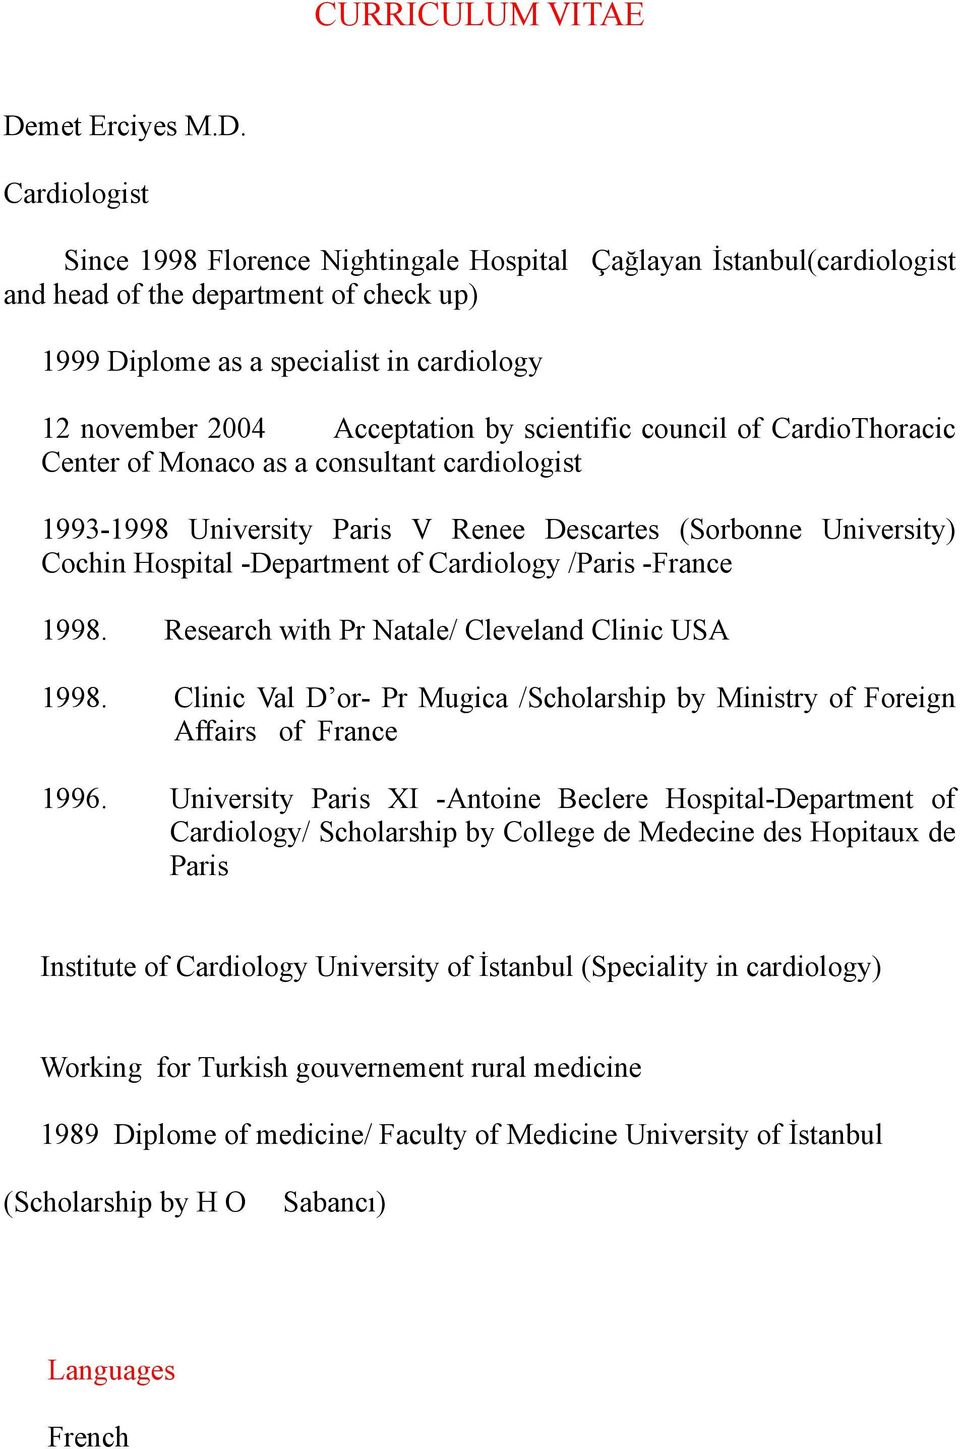 Hospital -Department of Cardiology /Paris -France 1998. Research with Pr Natale/ Cleveland Clinic USA 1998. Clinic Val D or- Pr Mugica /Scholarship by Ministry of Foreign Affairs of France 1996.